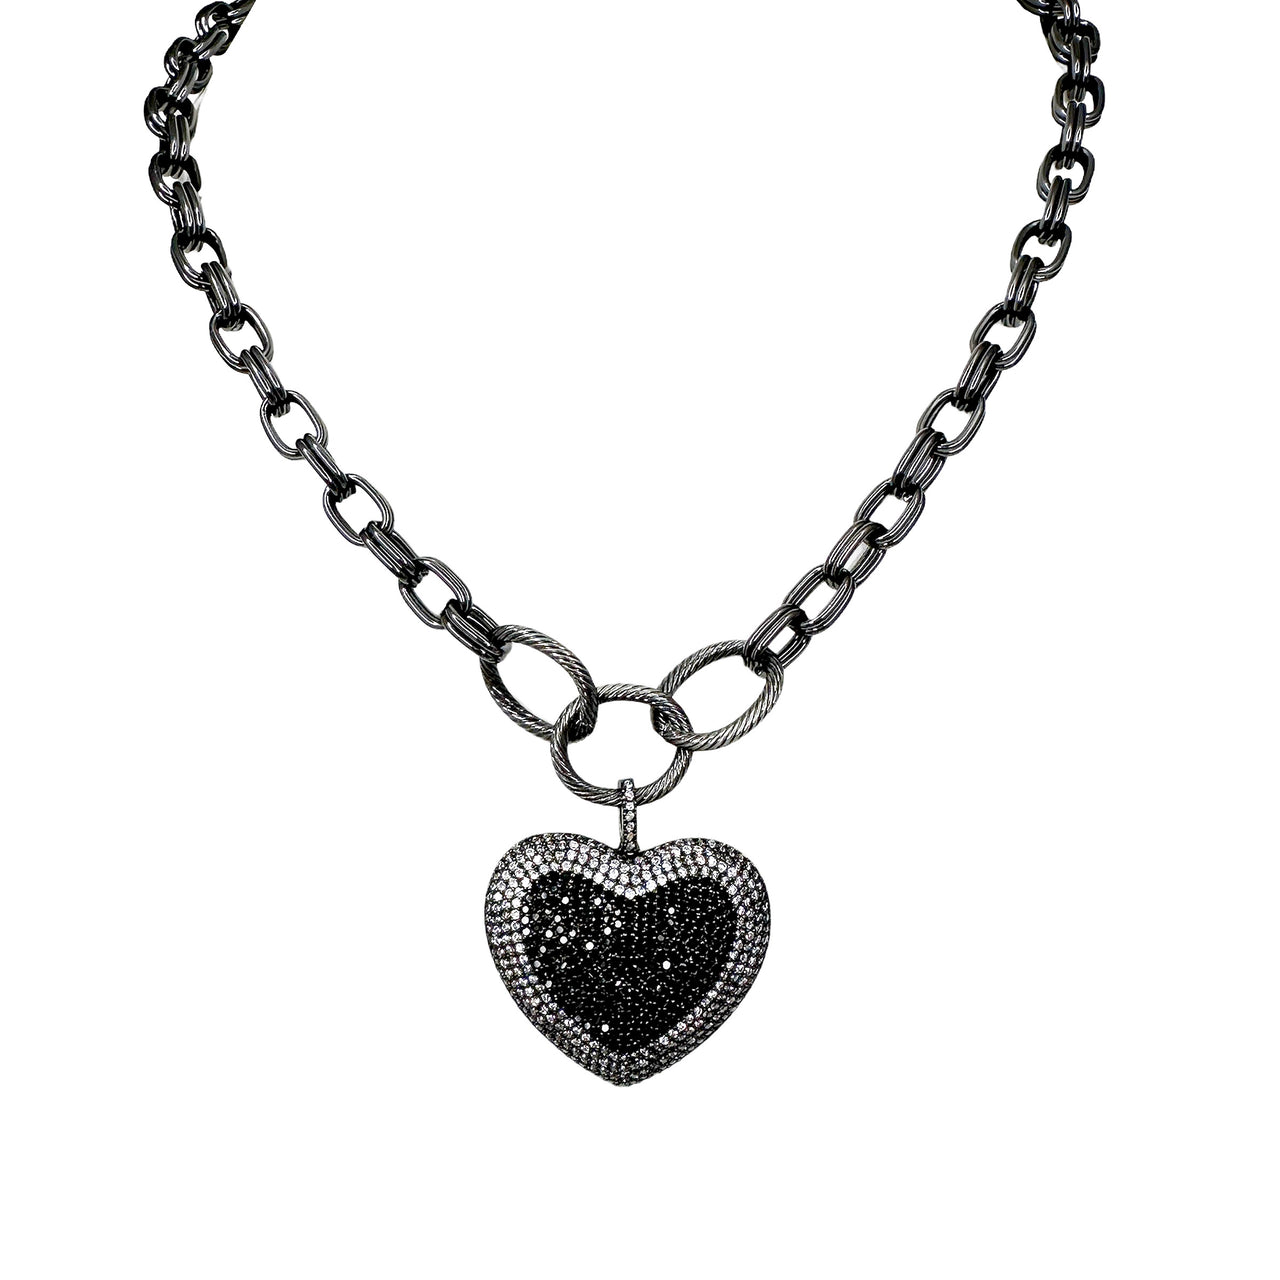 Lovers Lane Necklace